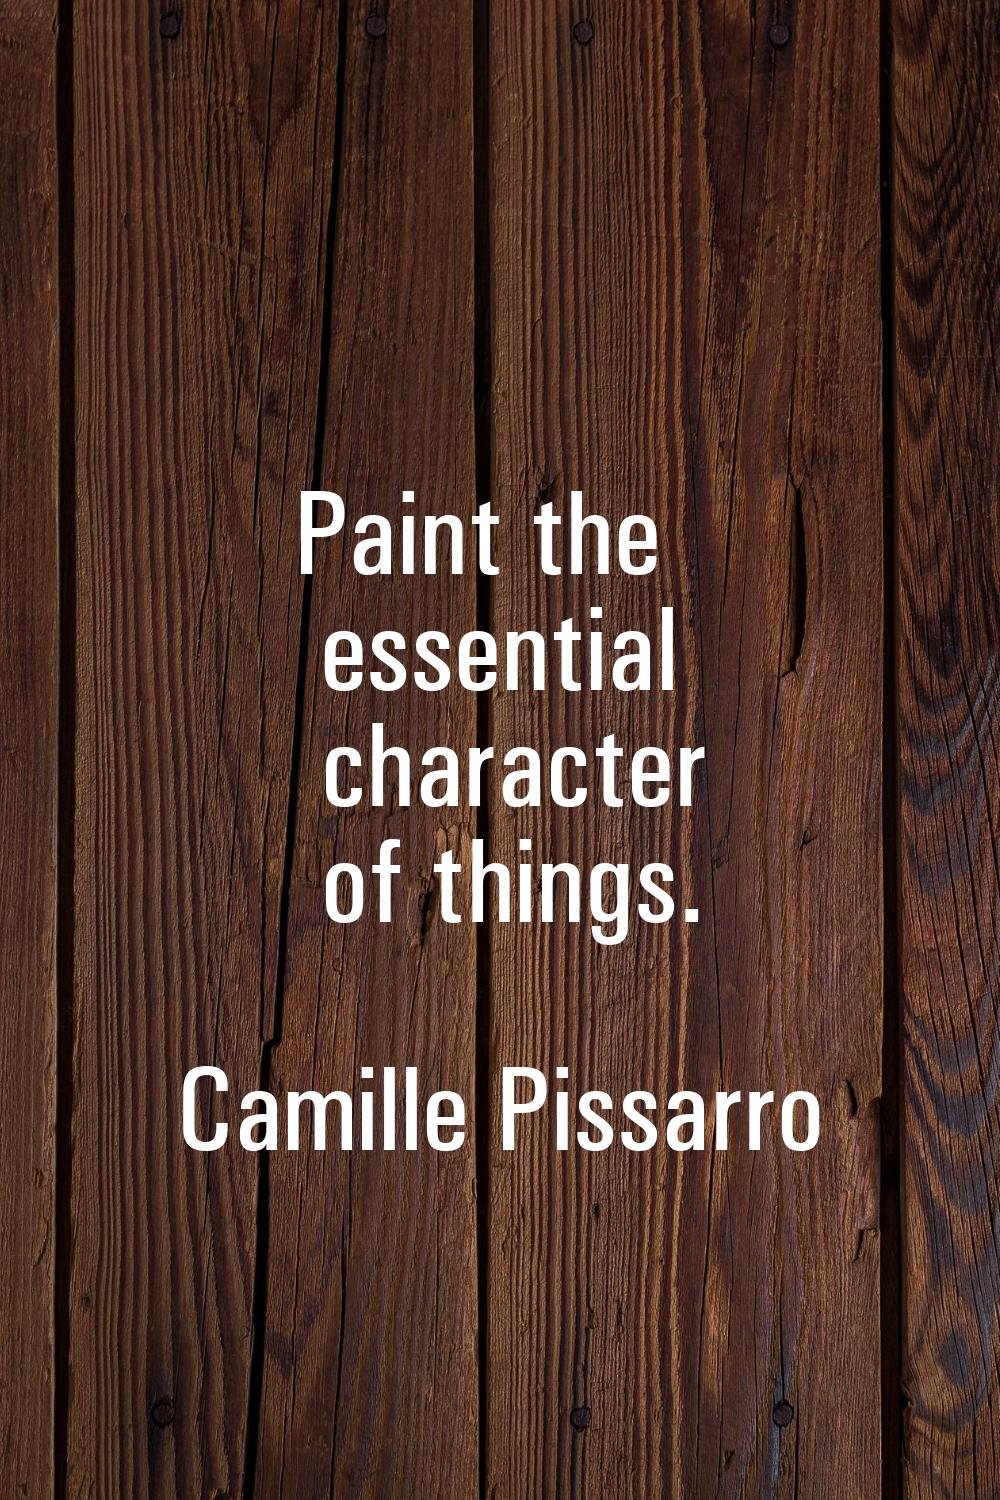 Paint the essential character of things.